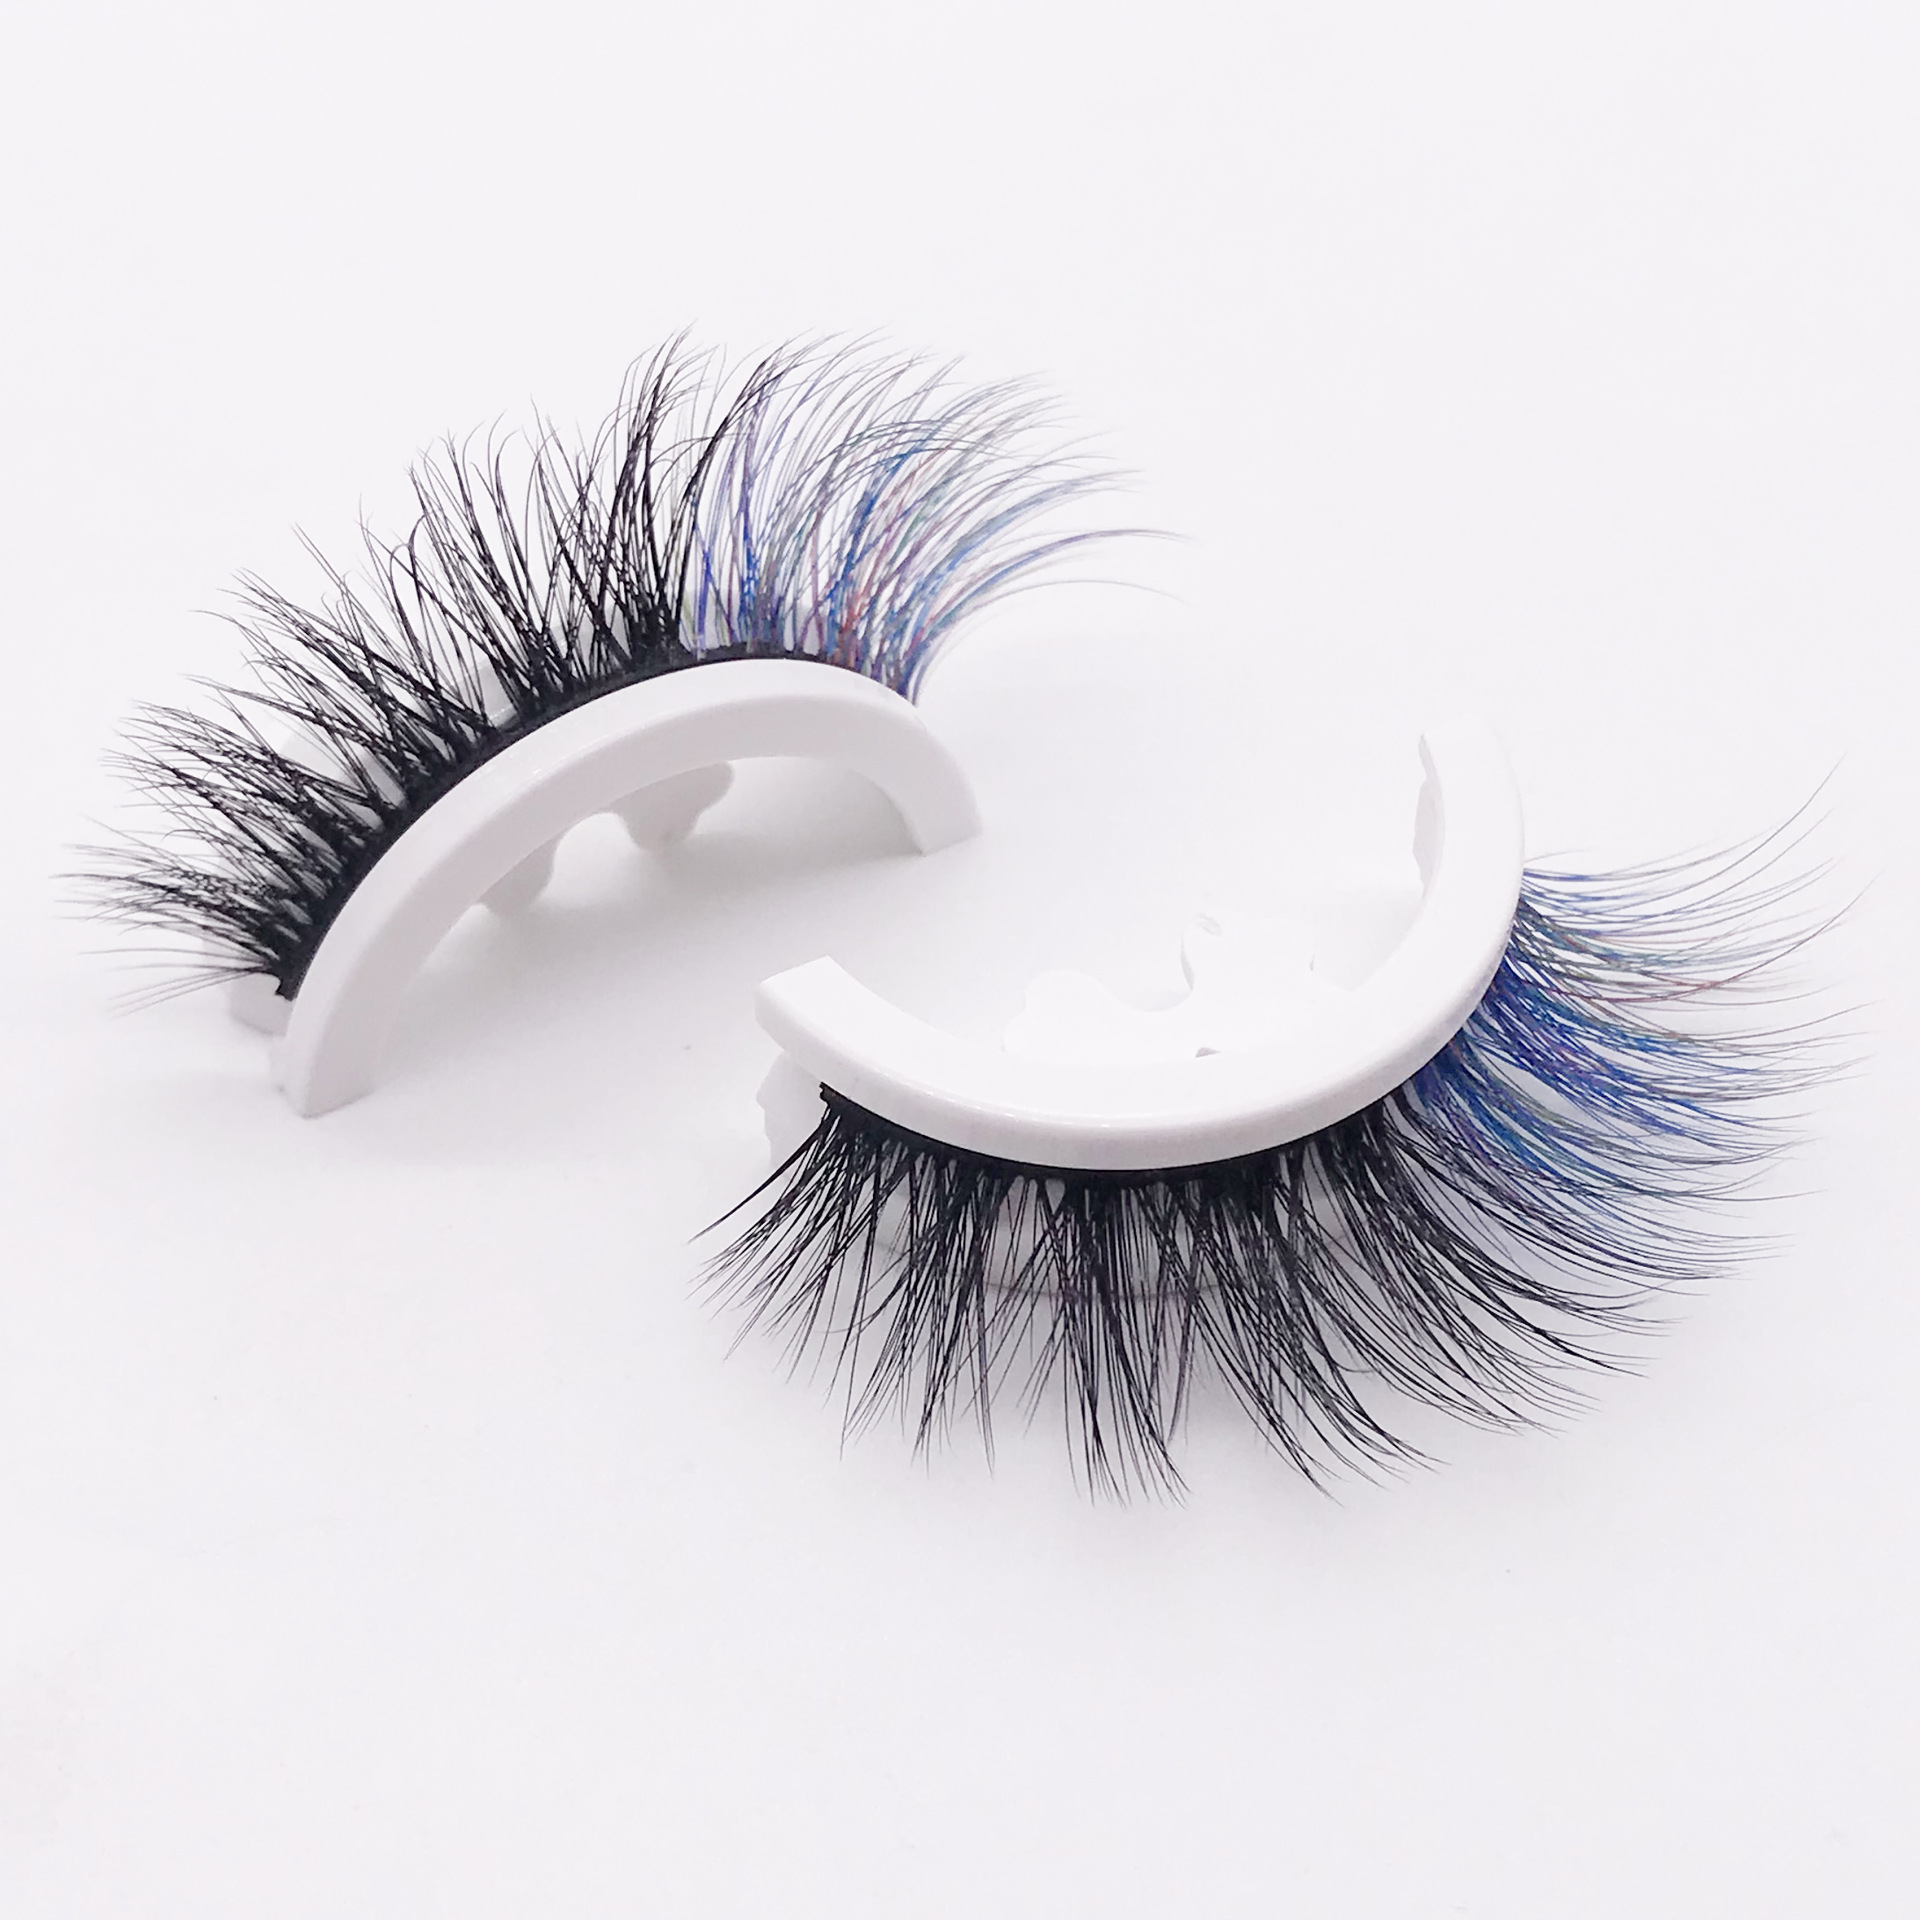 Glue-Free New Color Self-Adhesive False Eyelashes Easy to Wear Self-Adhesive Strip Exaggerated Color Self-Adhesive False Eyelashes Wholesale